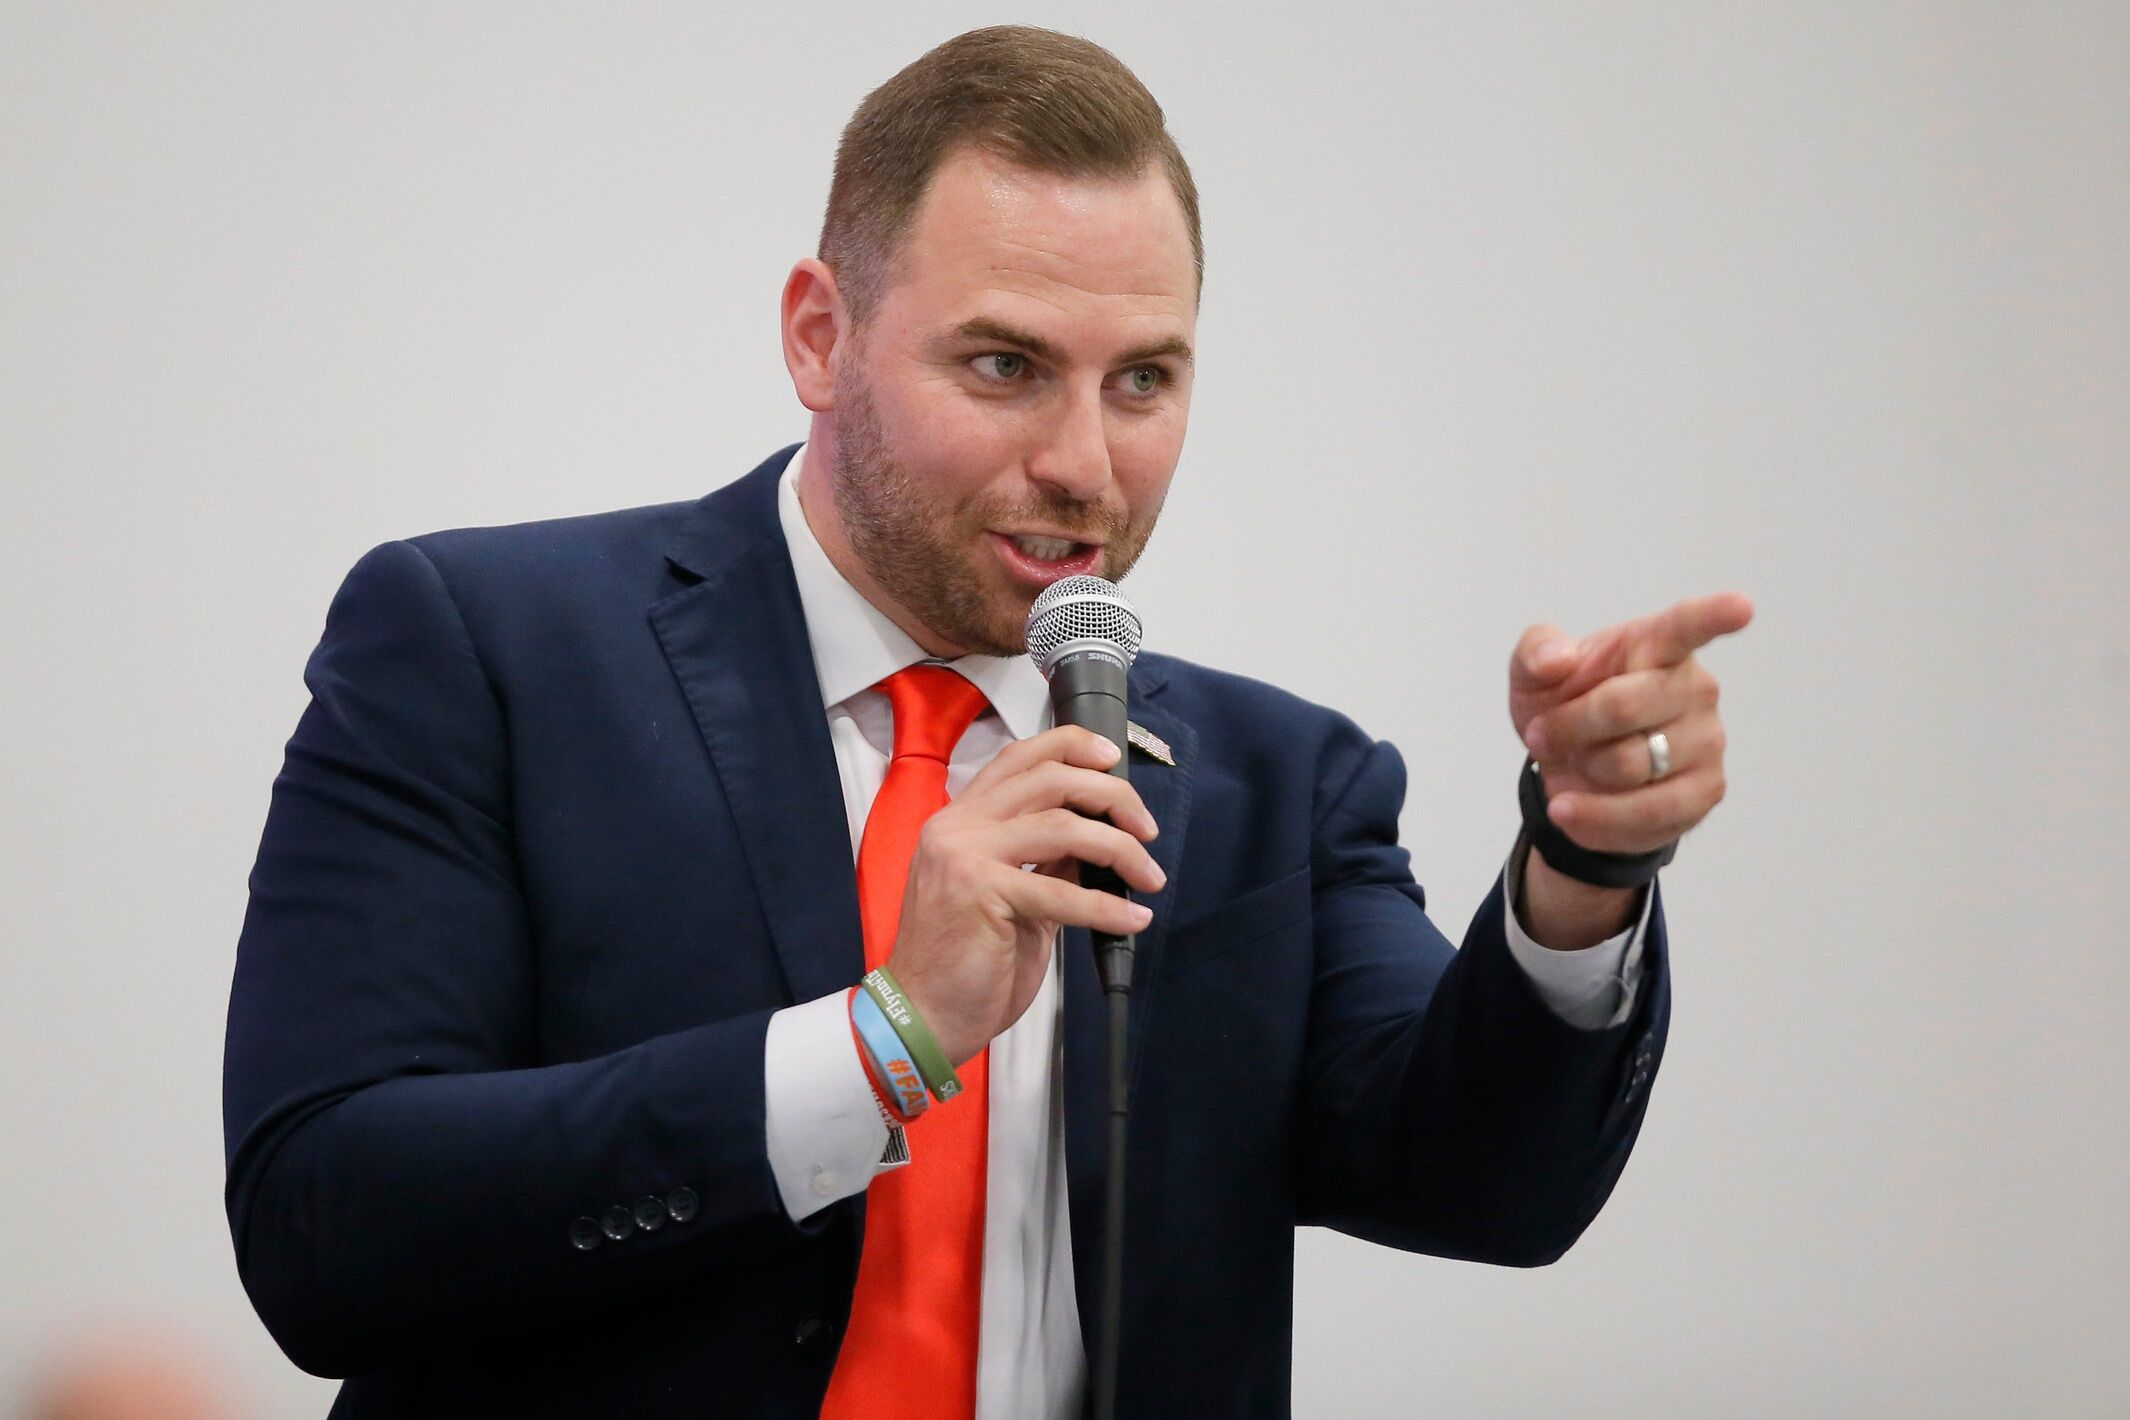 Then-Senate candidate Jackson Lahmeyer speaks during a rally for him in Oklahoma City, Friday, March 4, 2022